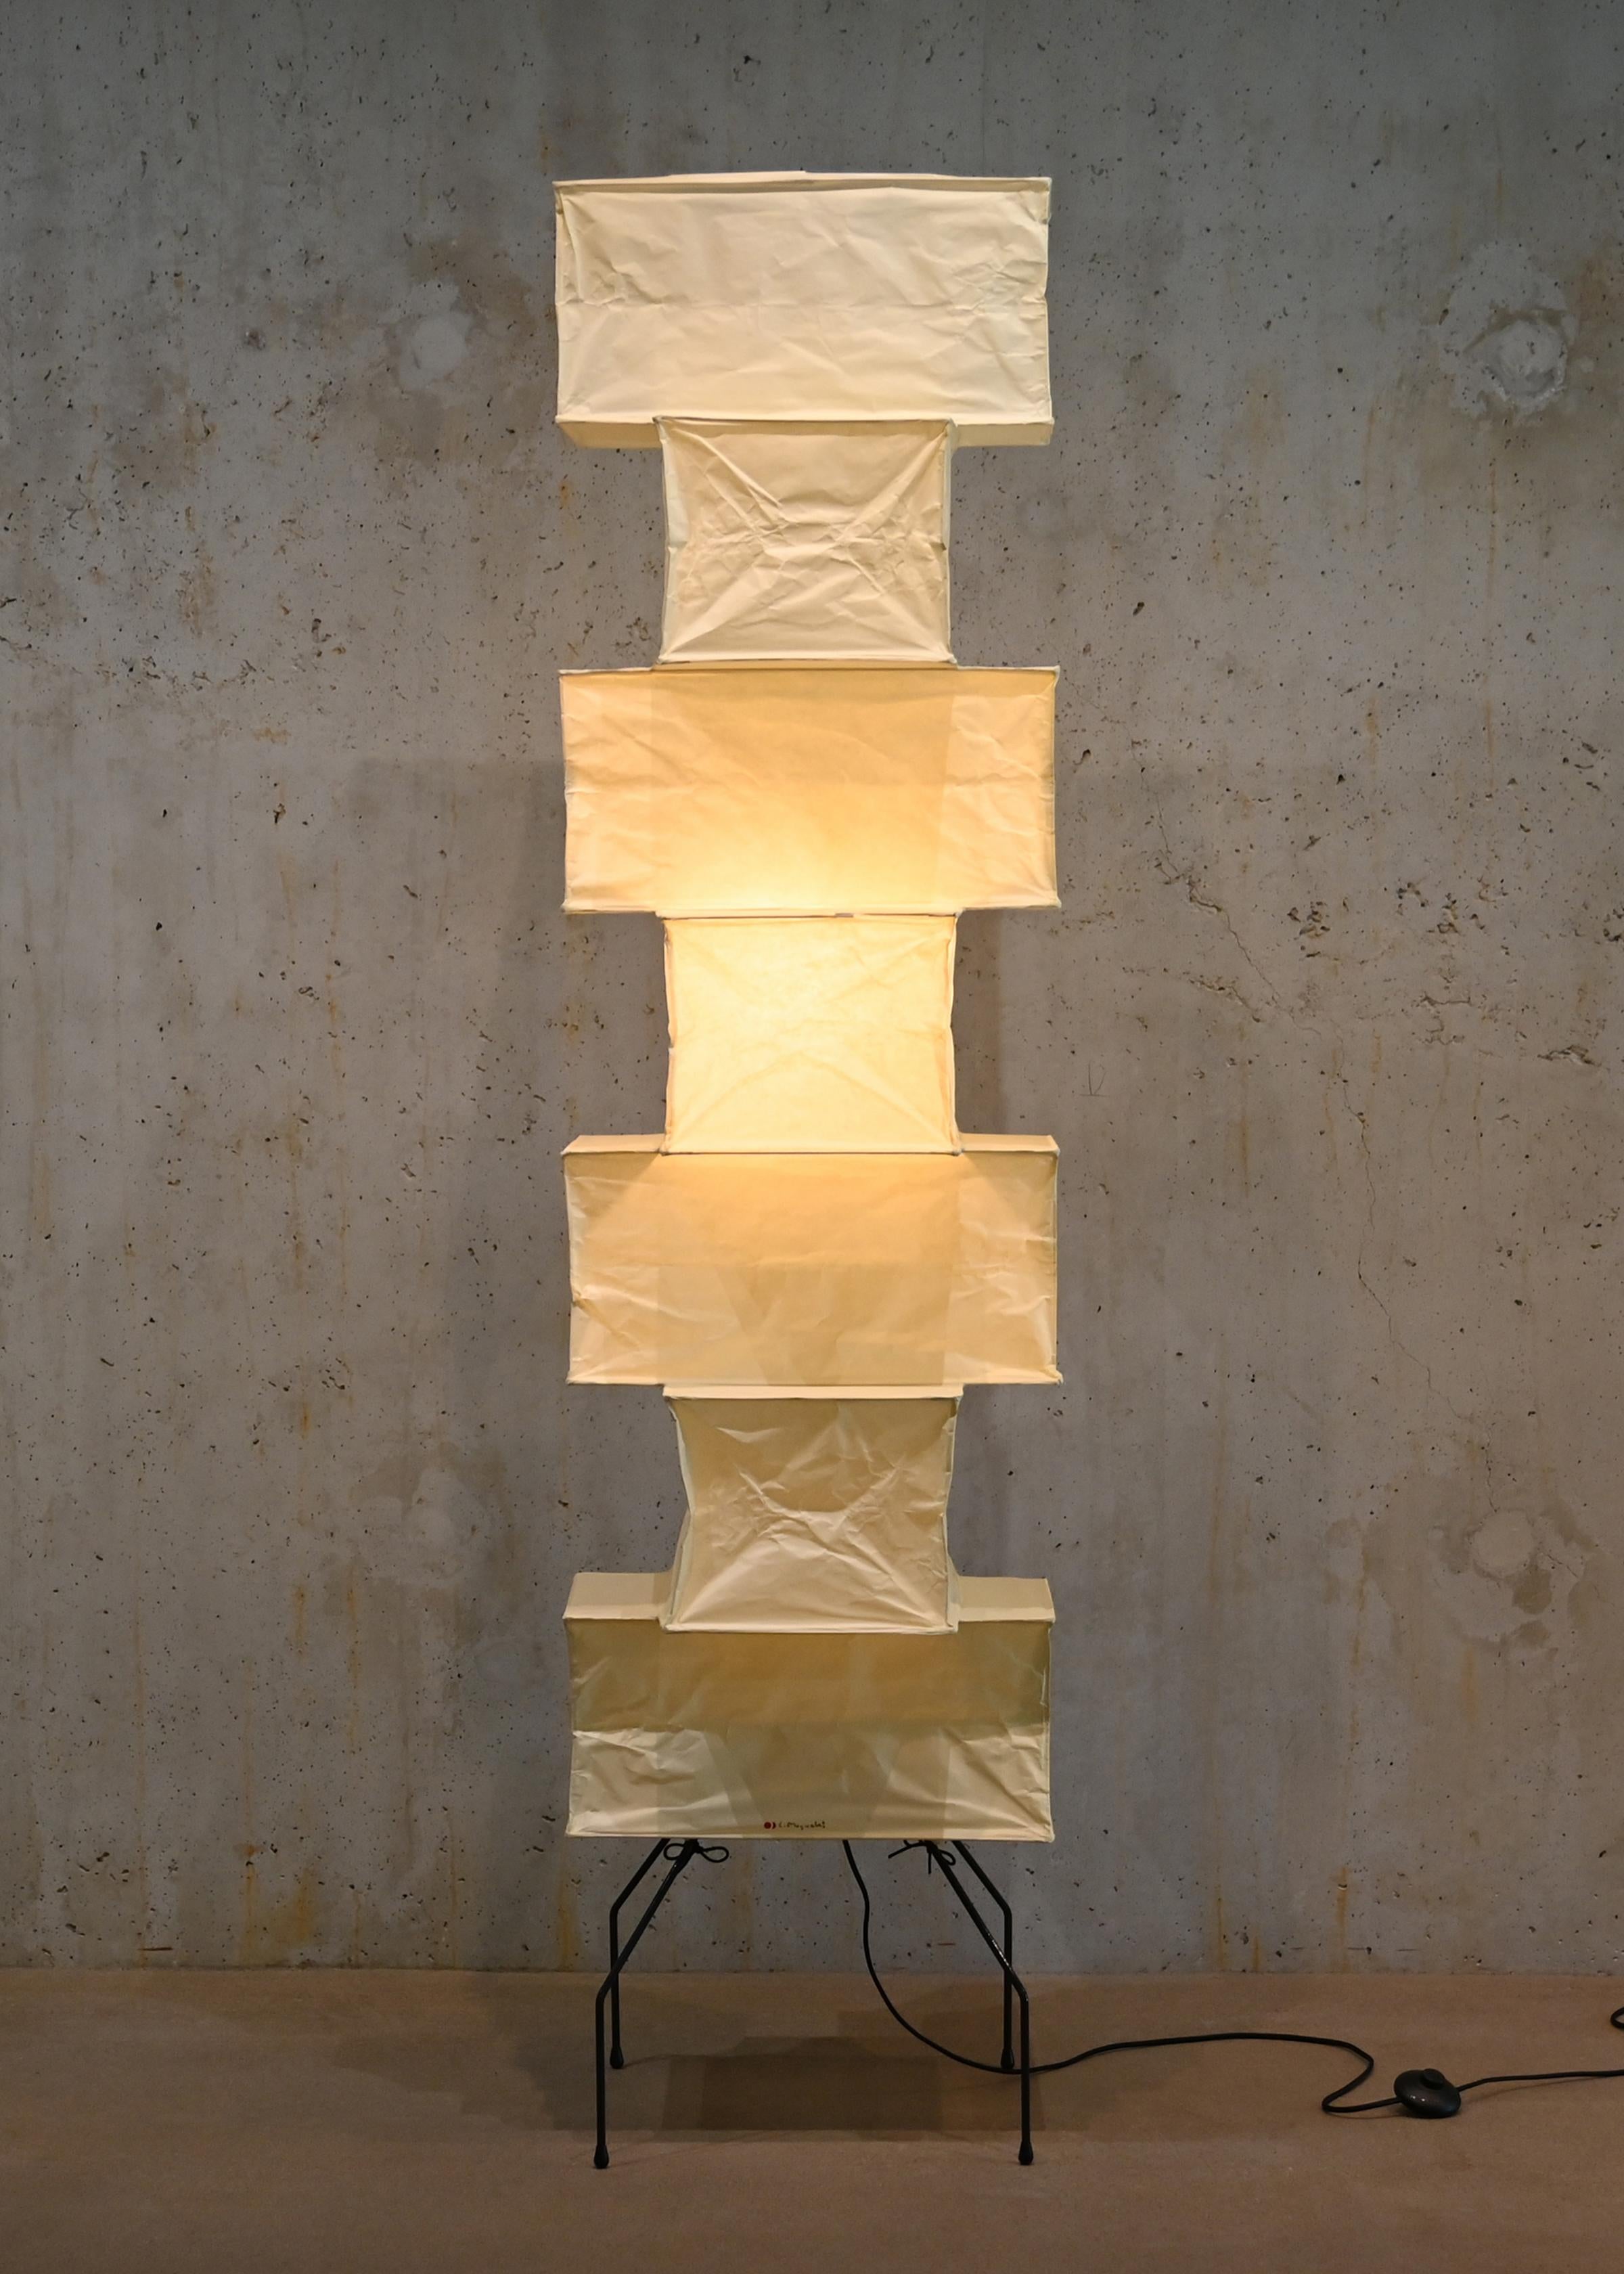 Iconic Akari light sculpture / large floor lamp known as Model UF4-L10 designed by Isamu Noguchi and handcrafted from traditional washi paper and bamboo. Each Akari lamp shade is meticulously crafted by hand in the Ozeki workshop, a traditional